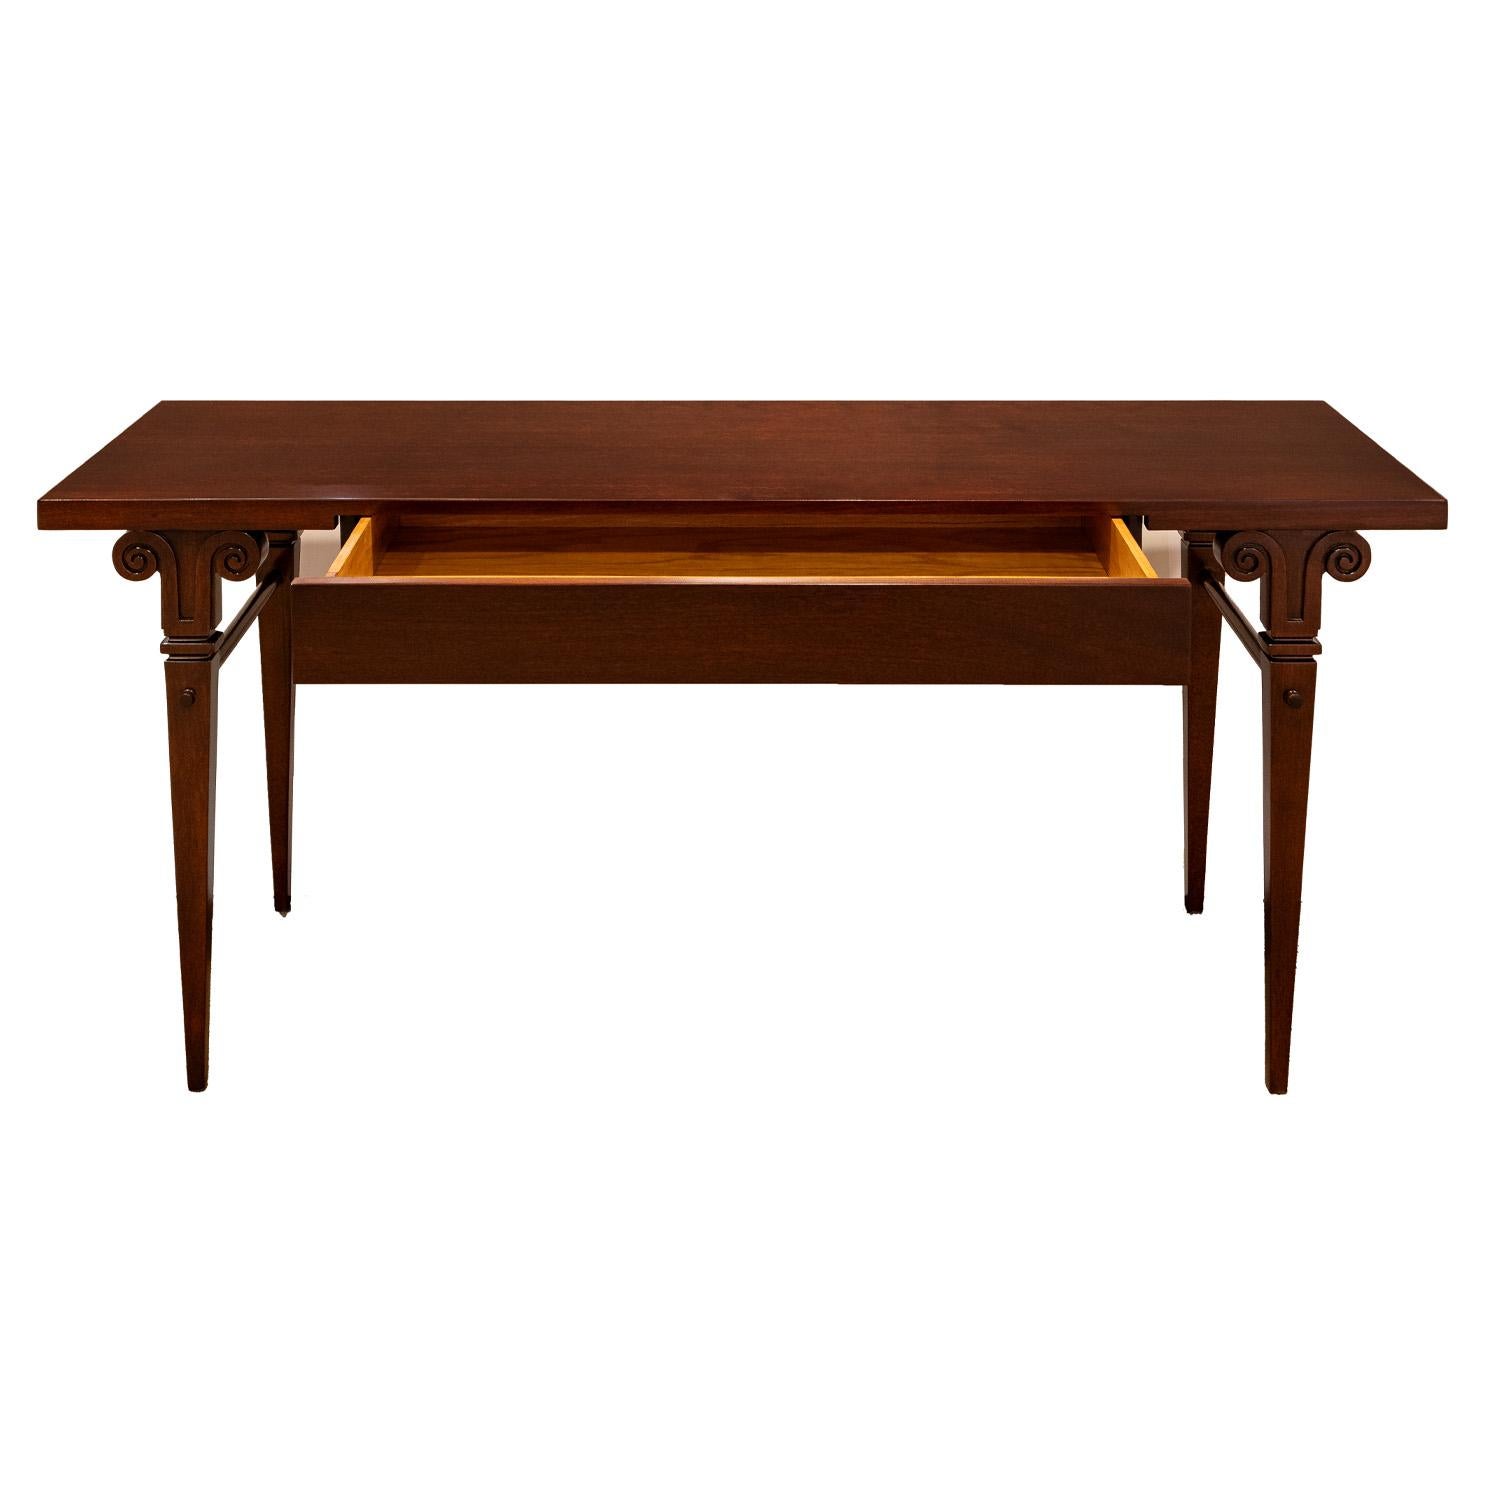 Hand-Crafted Tommi Parzinger Neoclassical Style Console Table in Mahogany 1960s For Sale